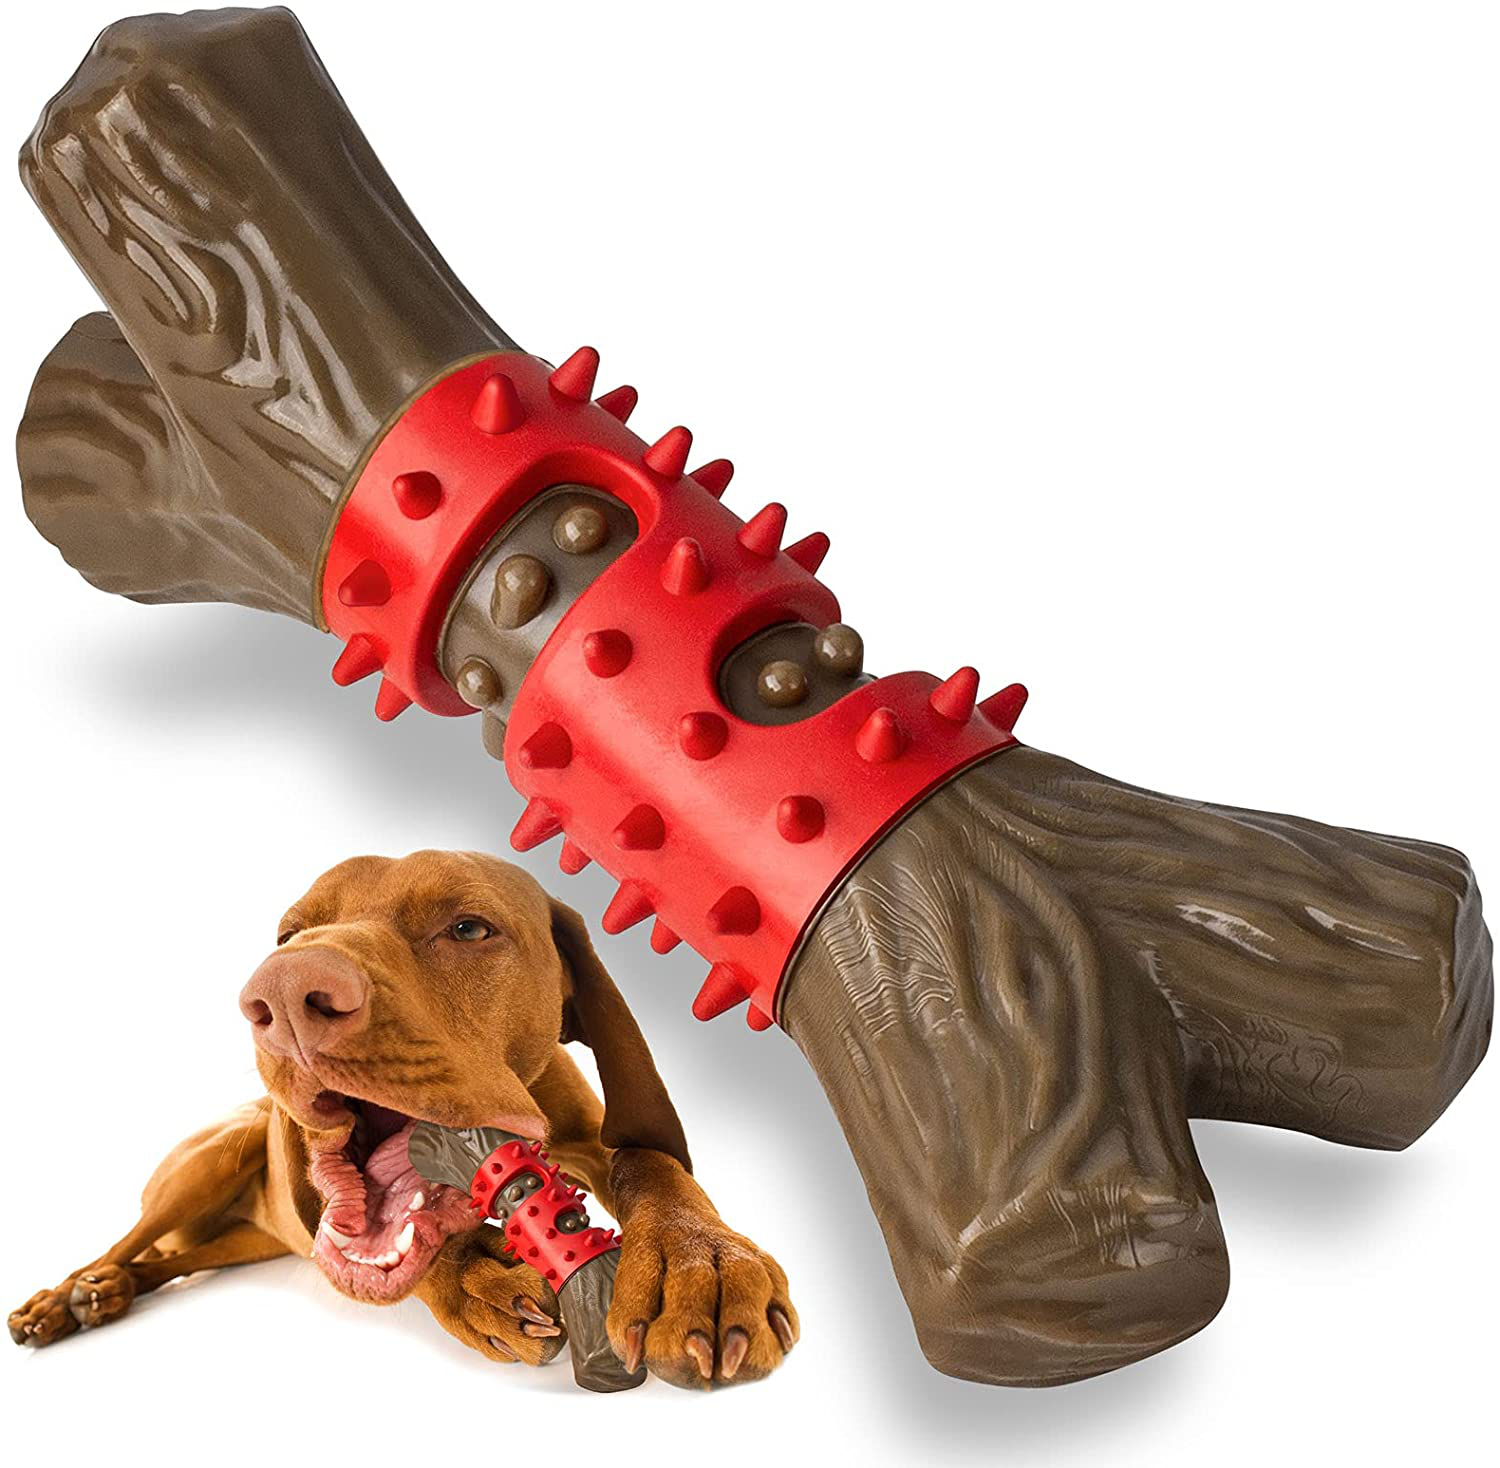 Dog Toys For Aggressive Chewers Large Breed Kseroo Tough Bones Dog Chew Toy  For Dogs Durable Nylon Puppy Teething Chew Toys Medium Dogs Heavy Duty